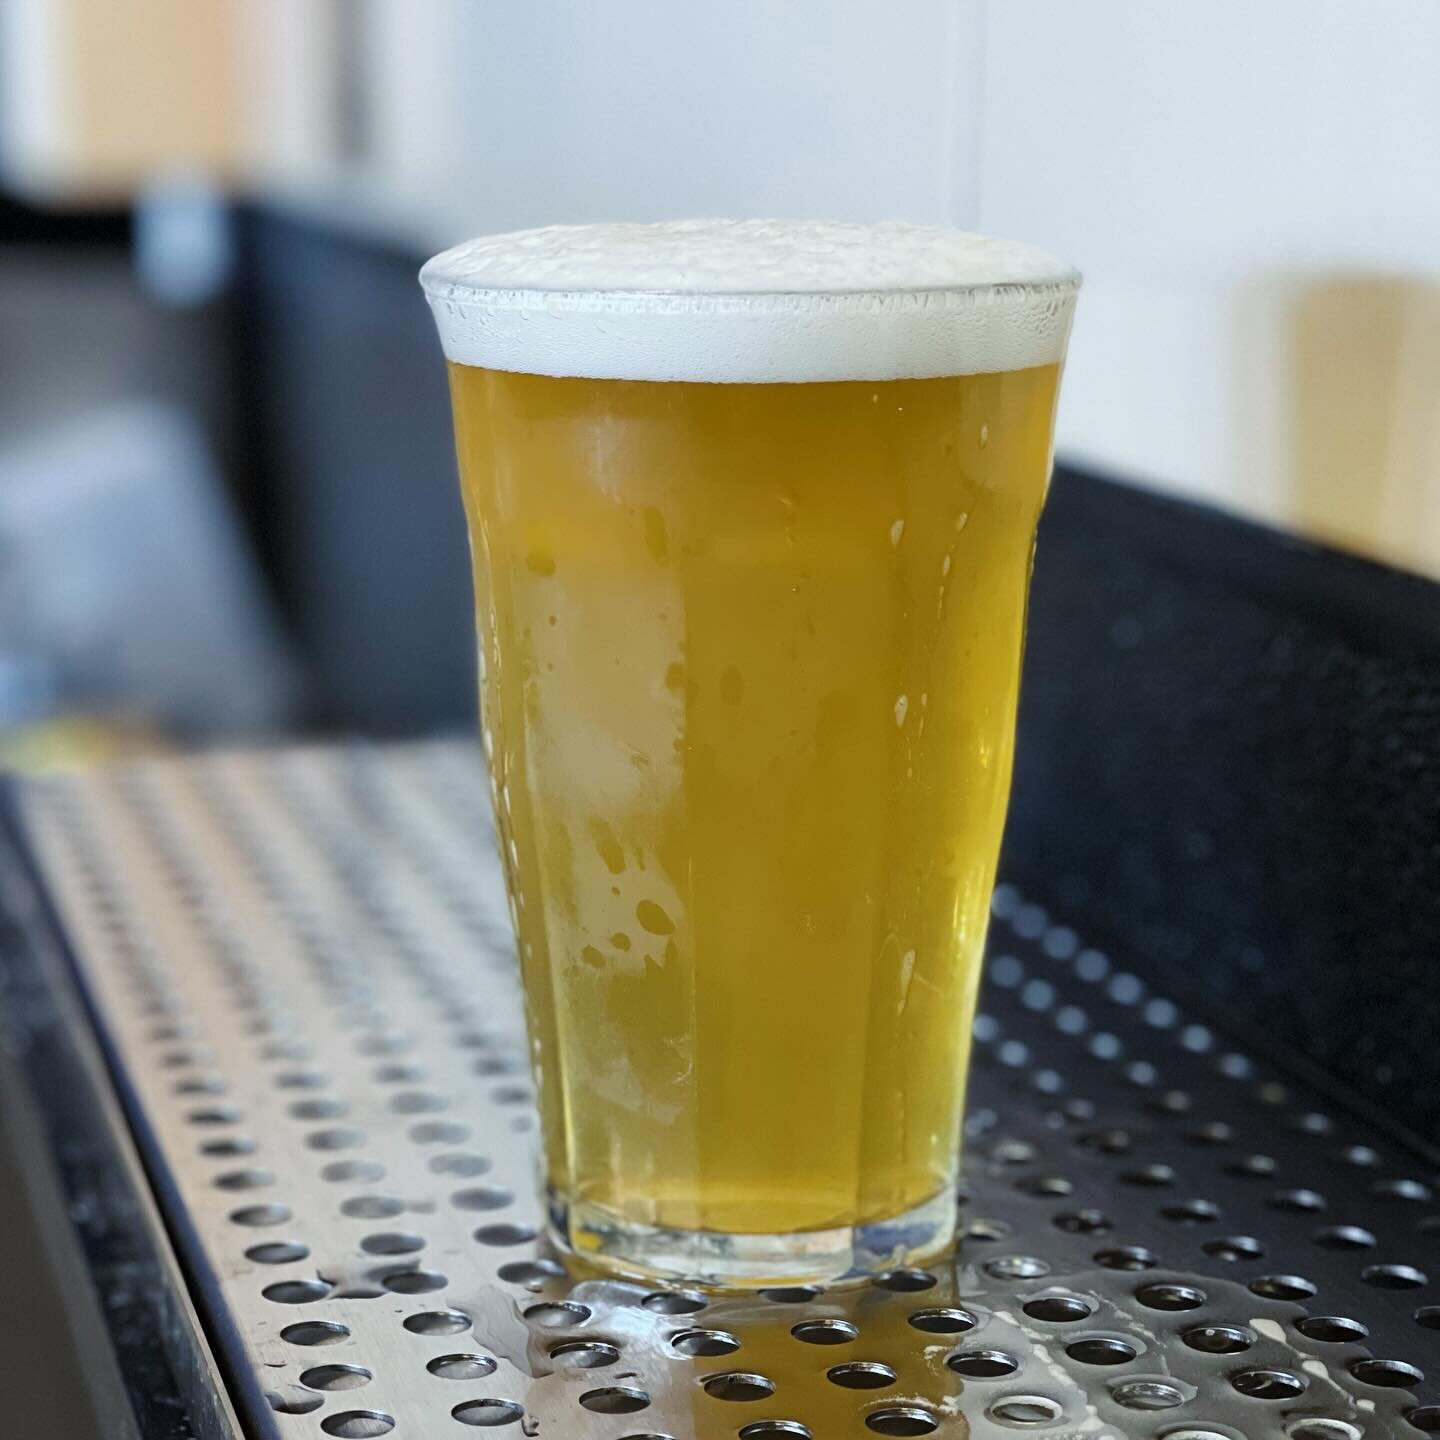 🚨 New Beer!! 🚨 

We&rsquo;re dropping our English Golden Ale this weekend! Definitely a style that flys under pretty much everyone&rsquo;s radar, especially in the states. But why bother?

CRUSHABILITY is why. Drinkin&rsquo; Beers is why. 

A healt